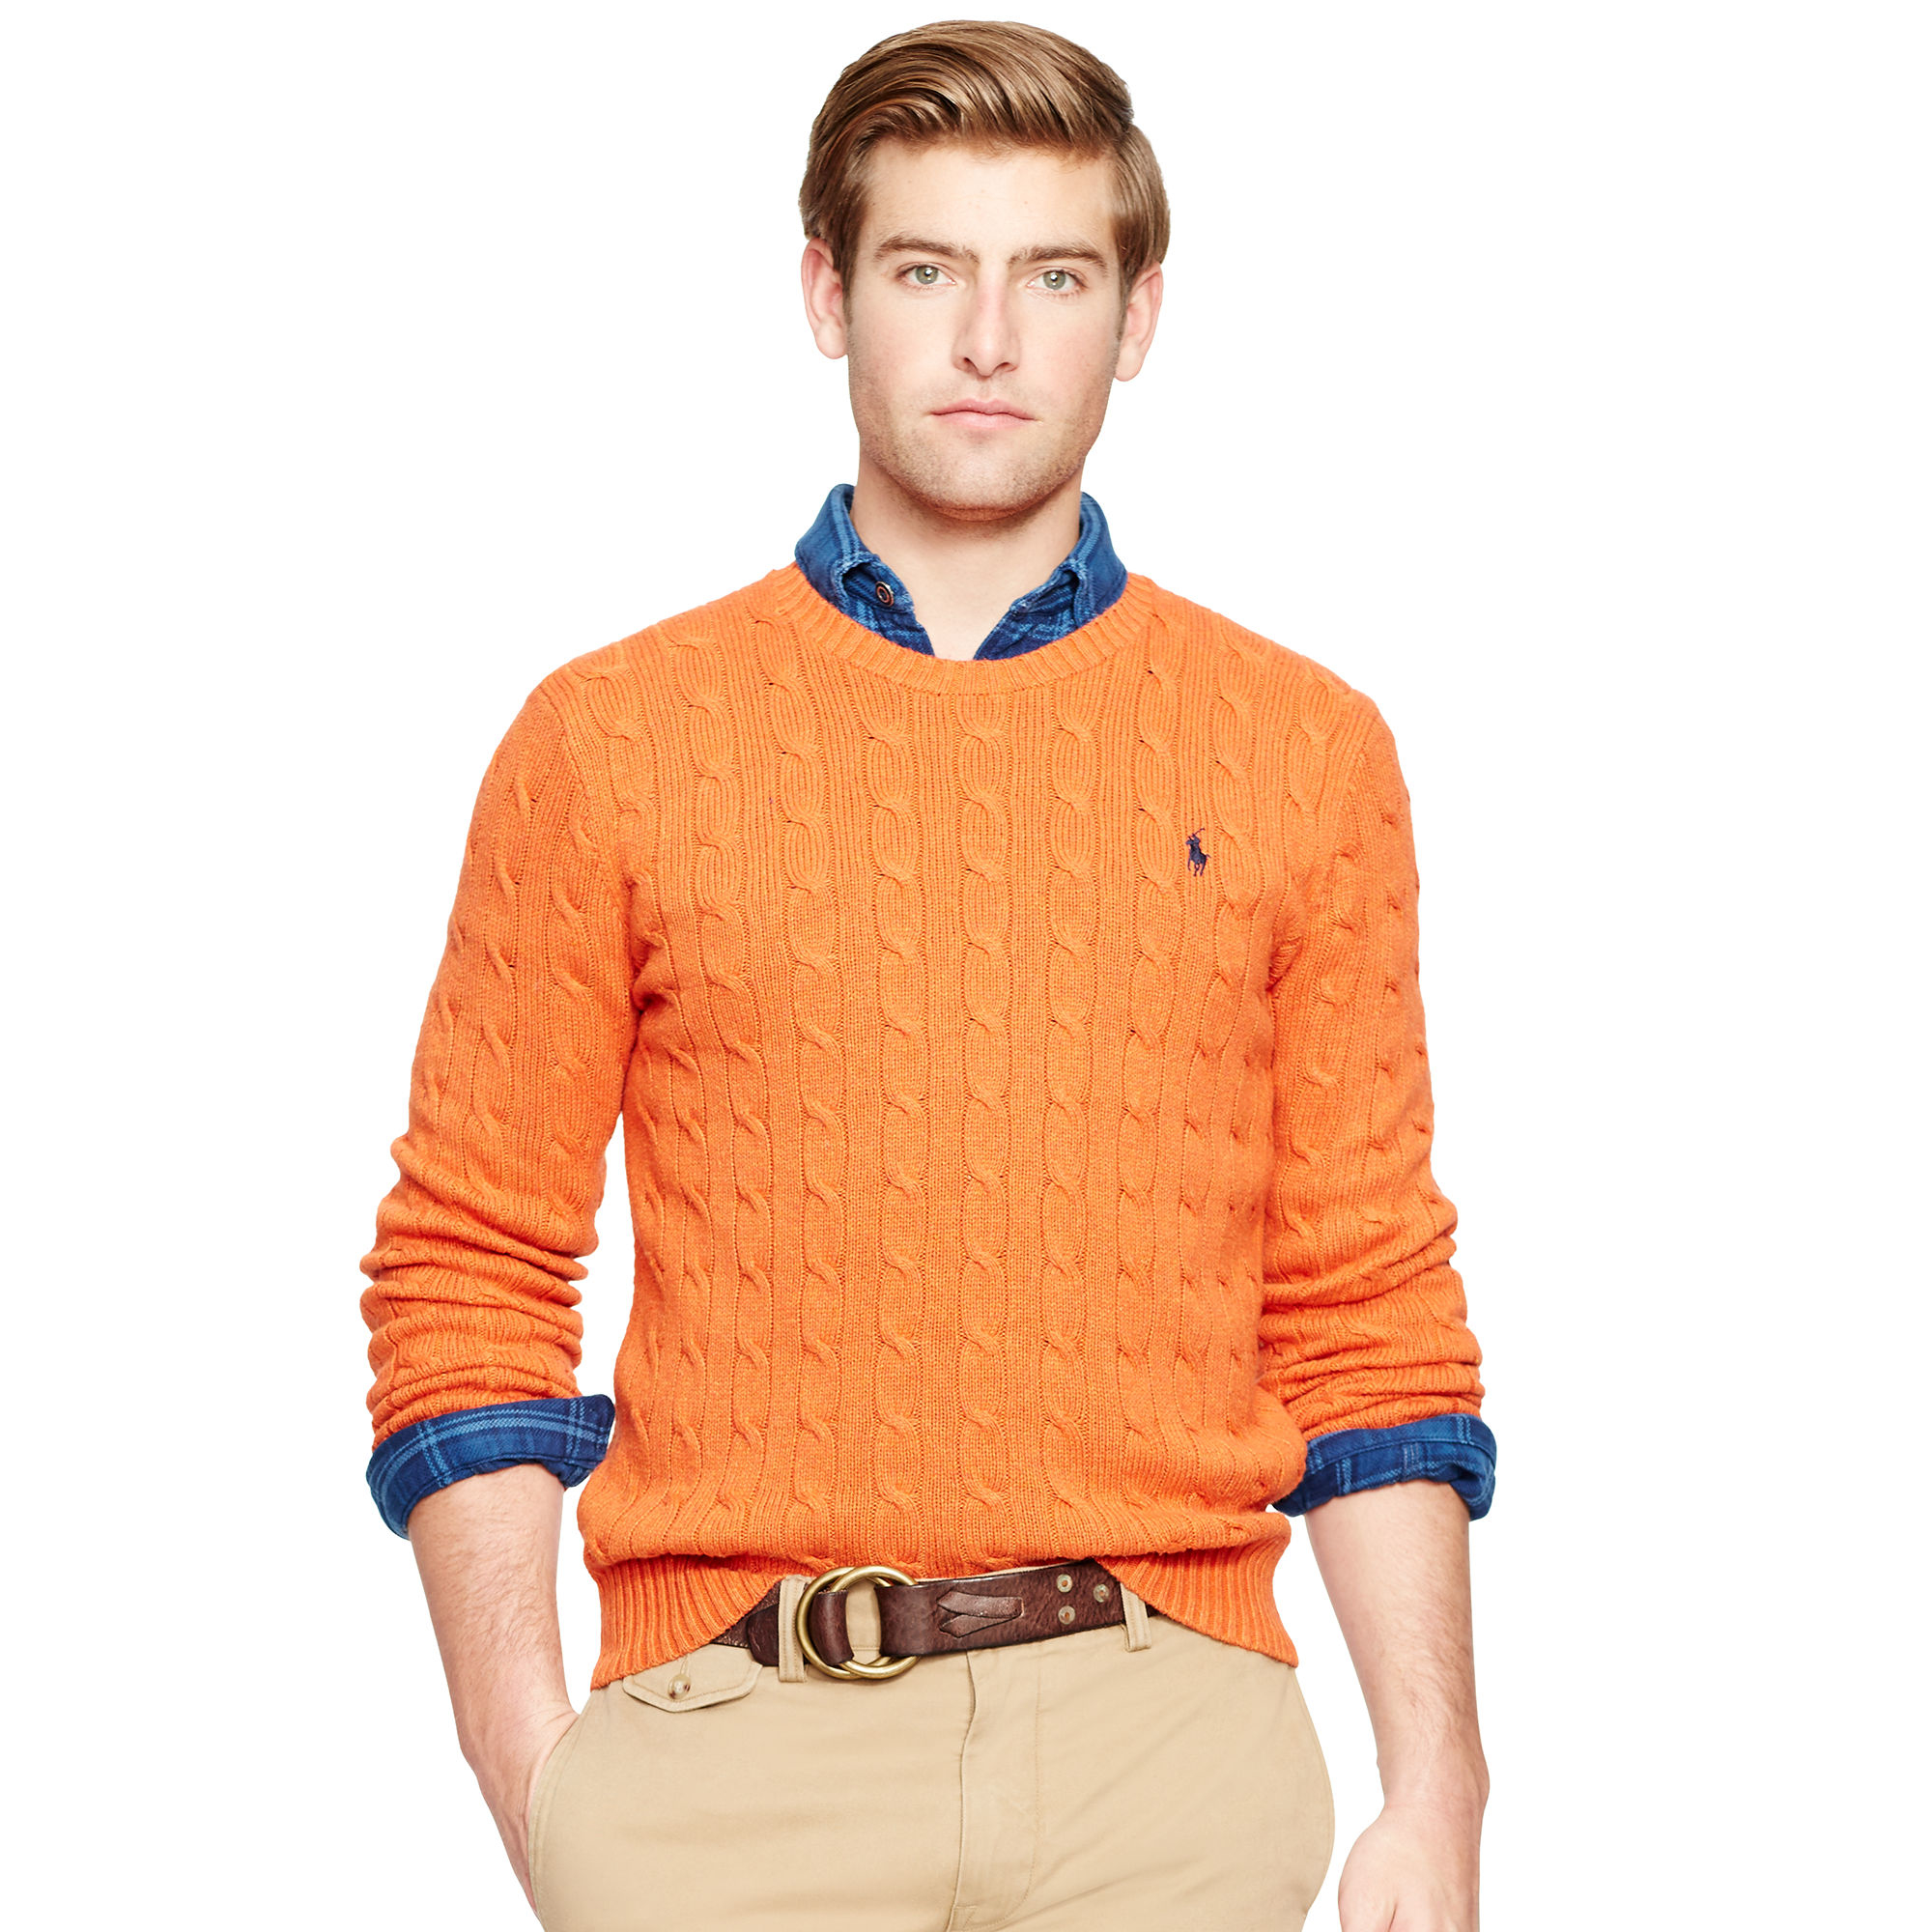 Polo Ralph Lauren Cable-knit Tussah Silk Sweater in Orange for Men - Lyst